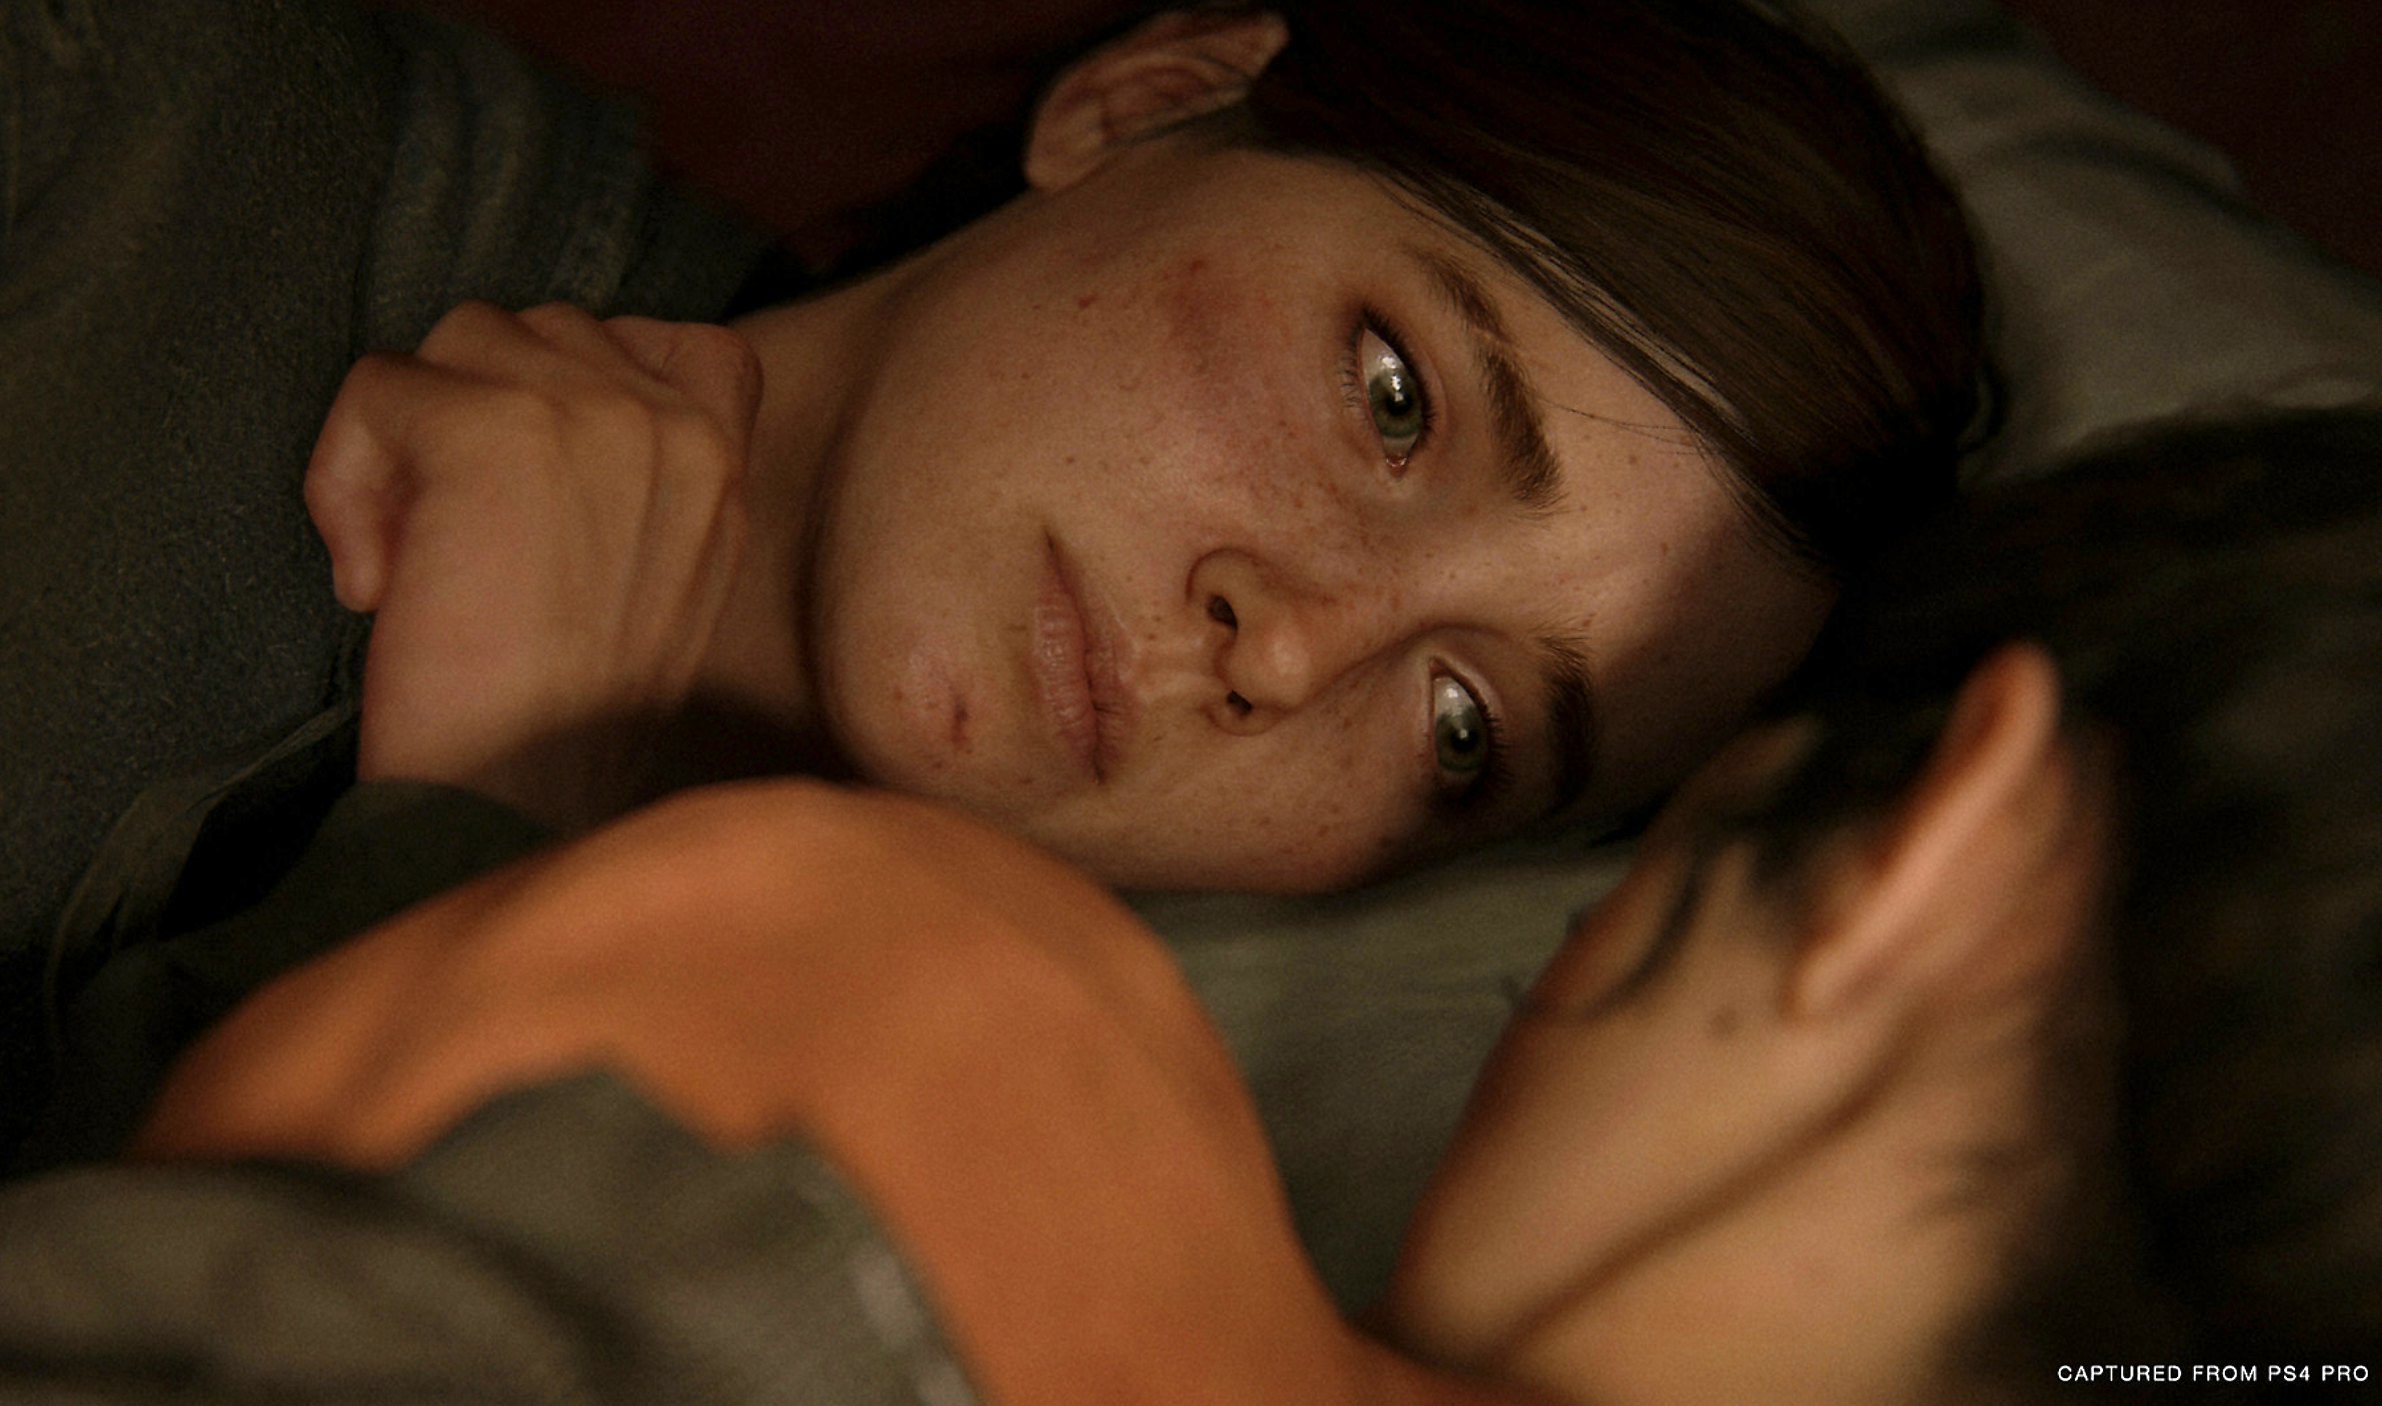 The rest of us: 'The Last of Us 2' trans controversy, explained